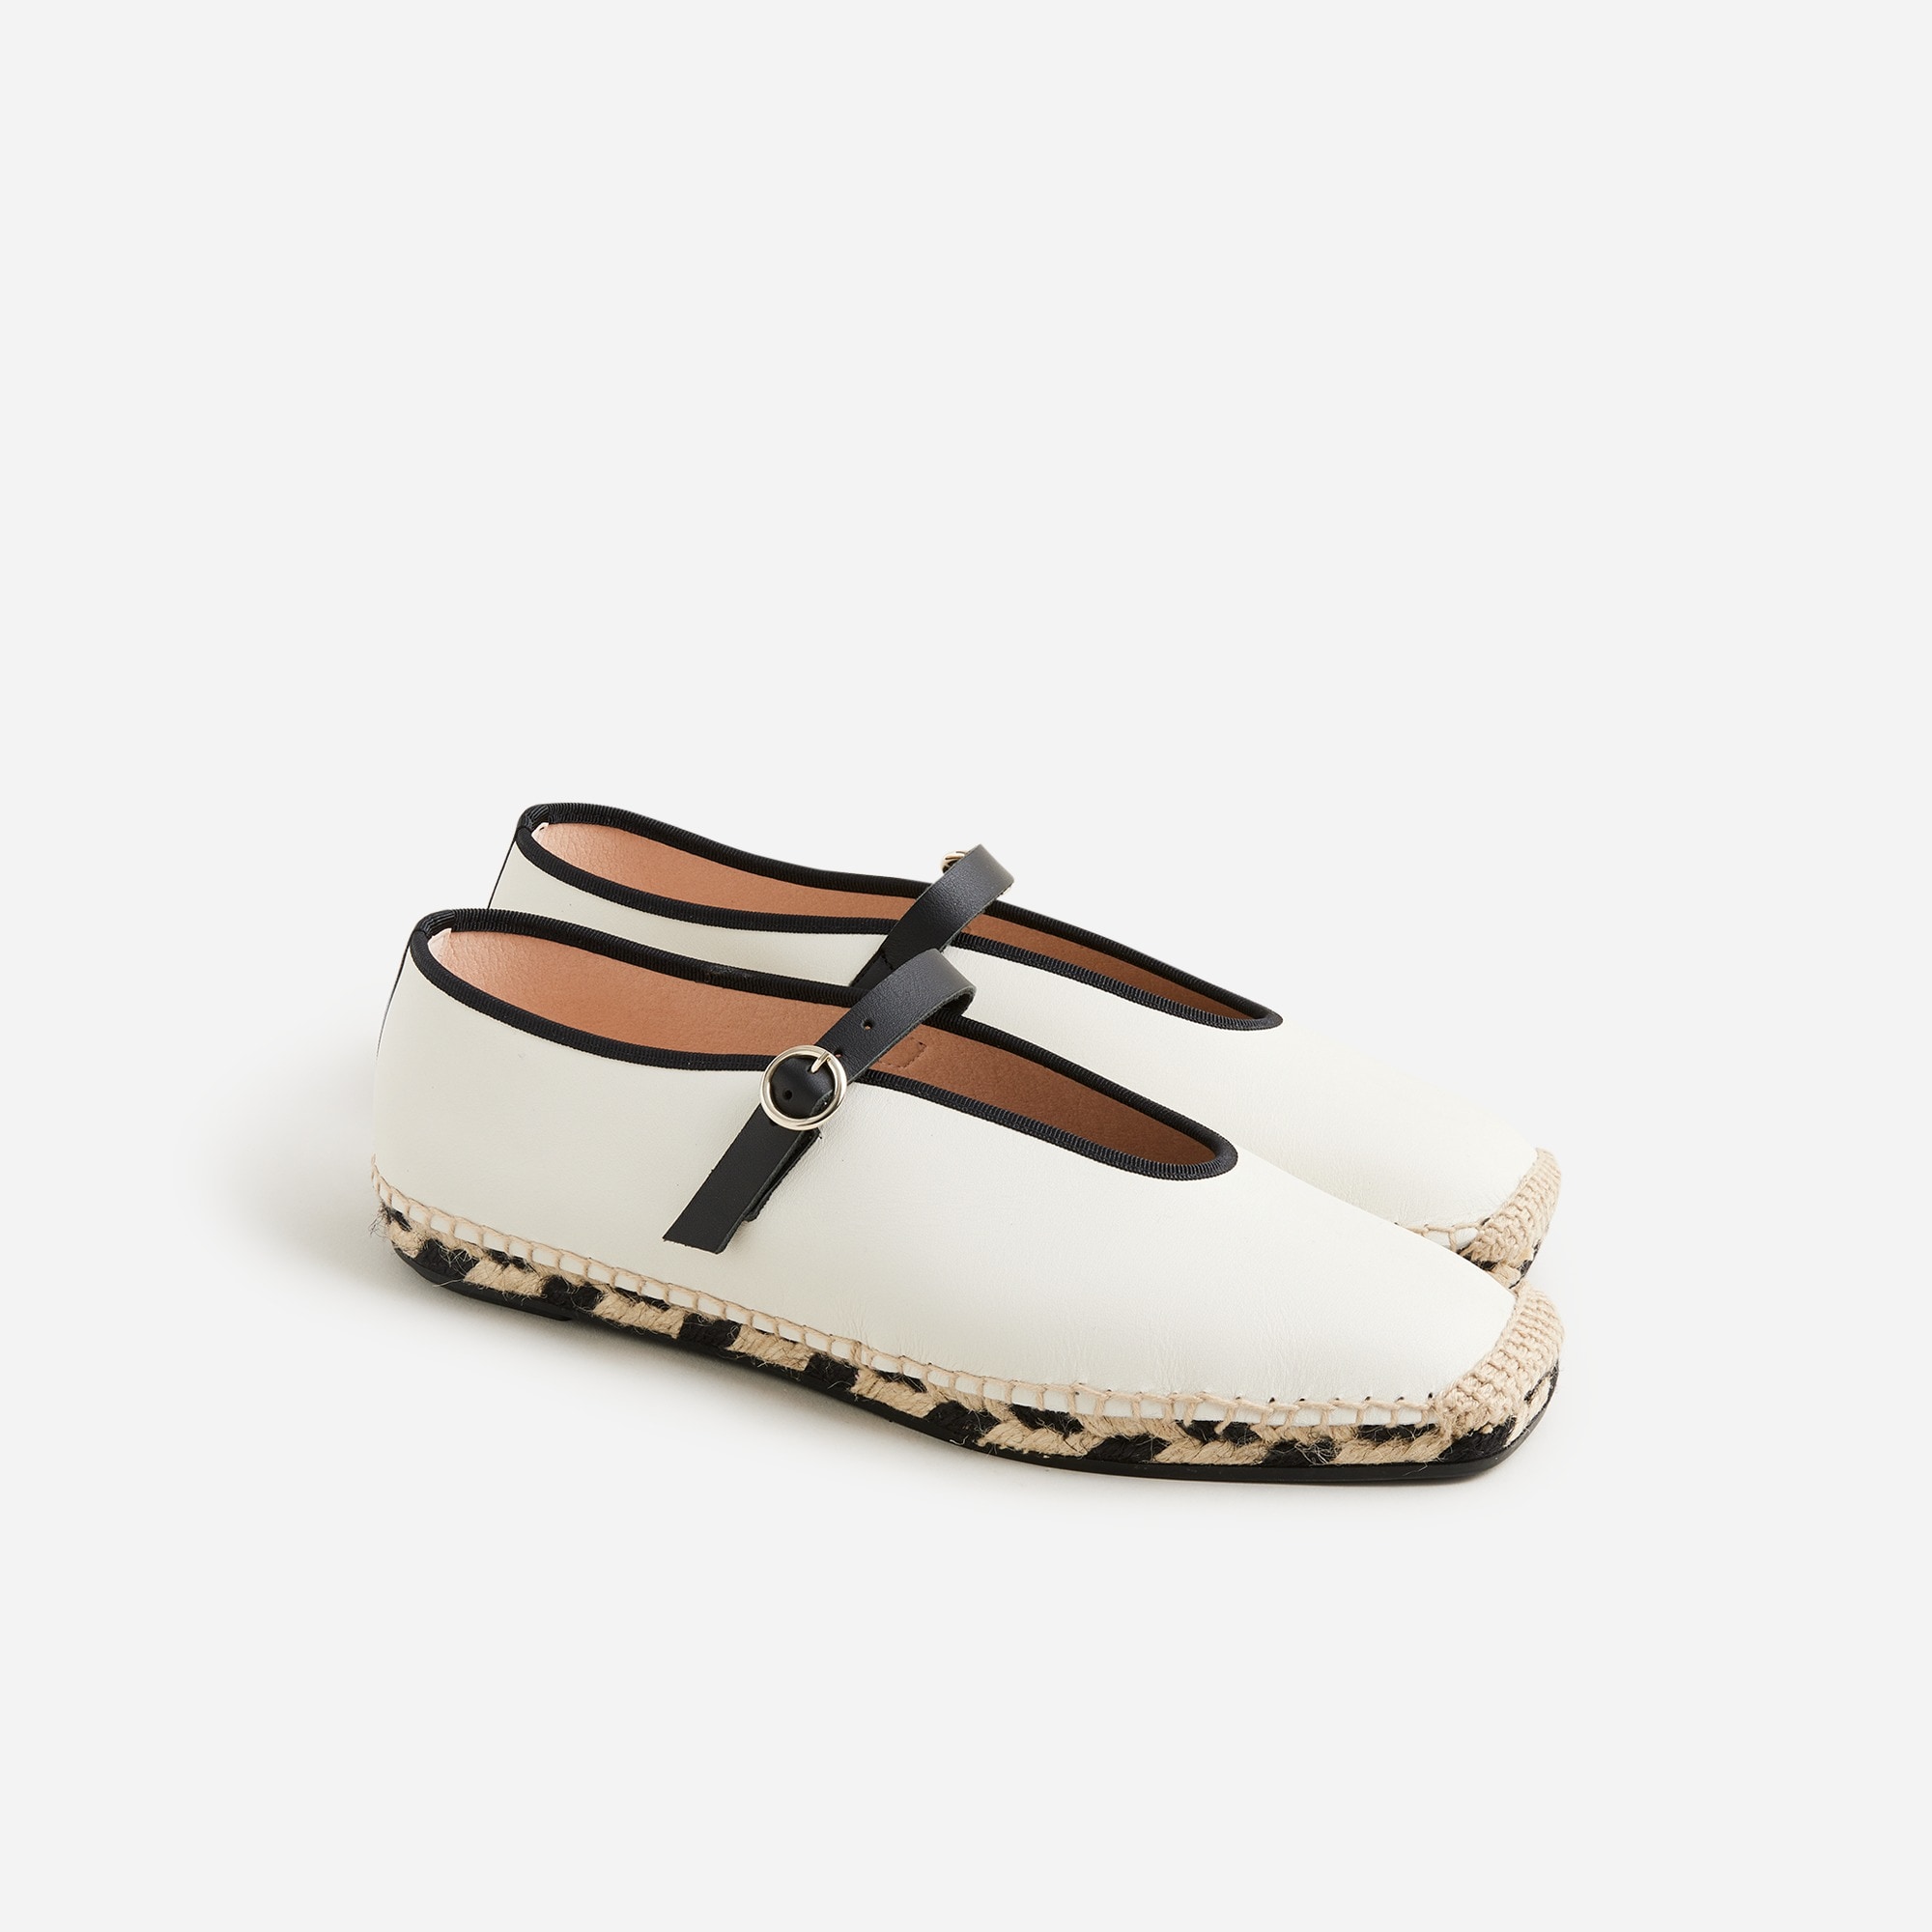  Made-in-Spain Mary Jane espadrilles in leather